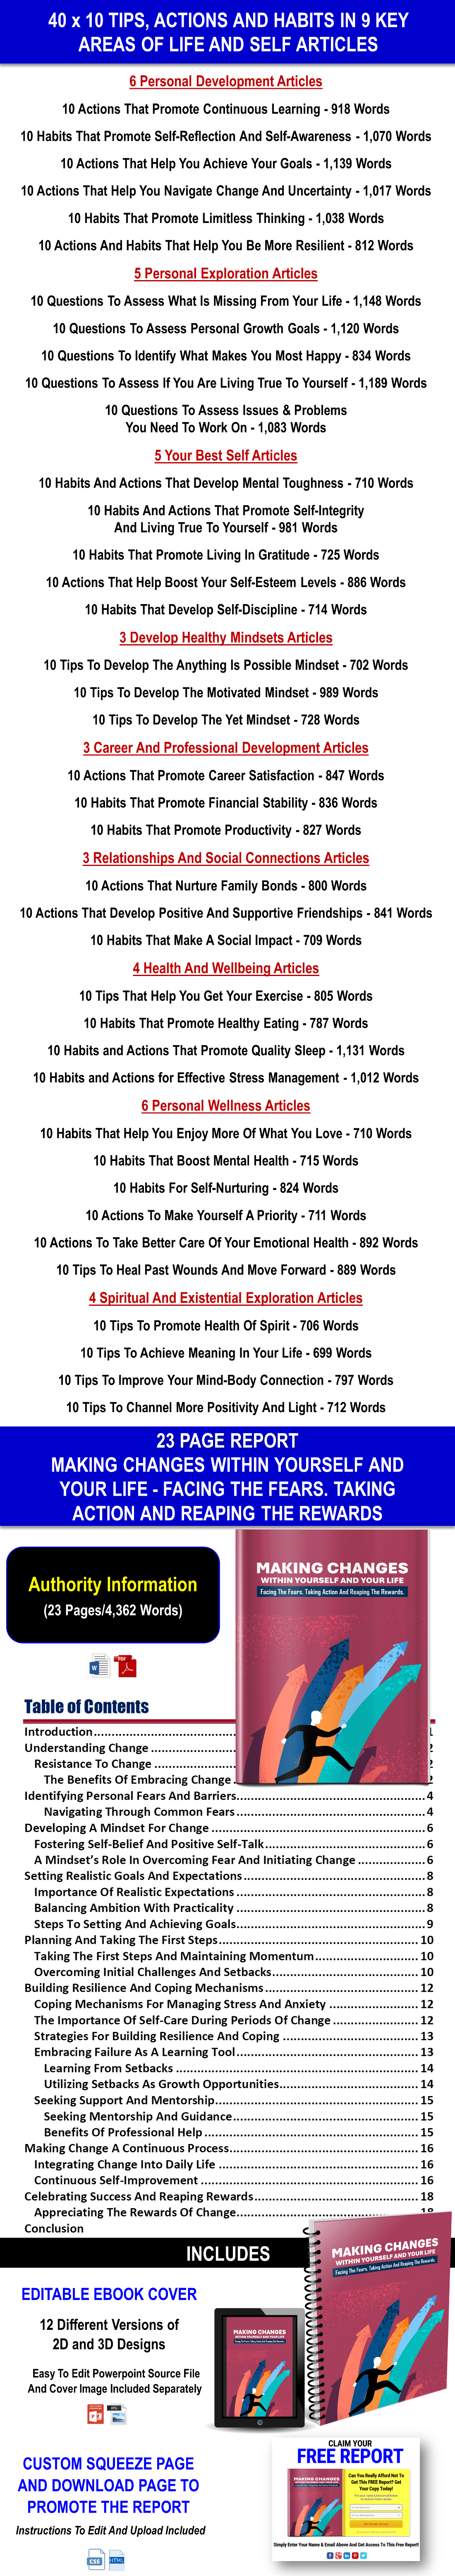  Changes This New Year 400 Key Habits, Tips And Actions In 9 Key Areas Of Life And Self Content Pack with PLR Rights